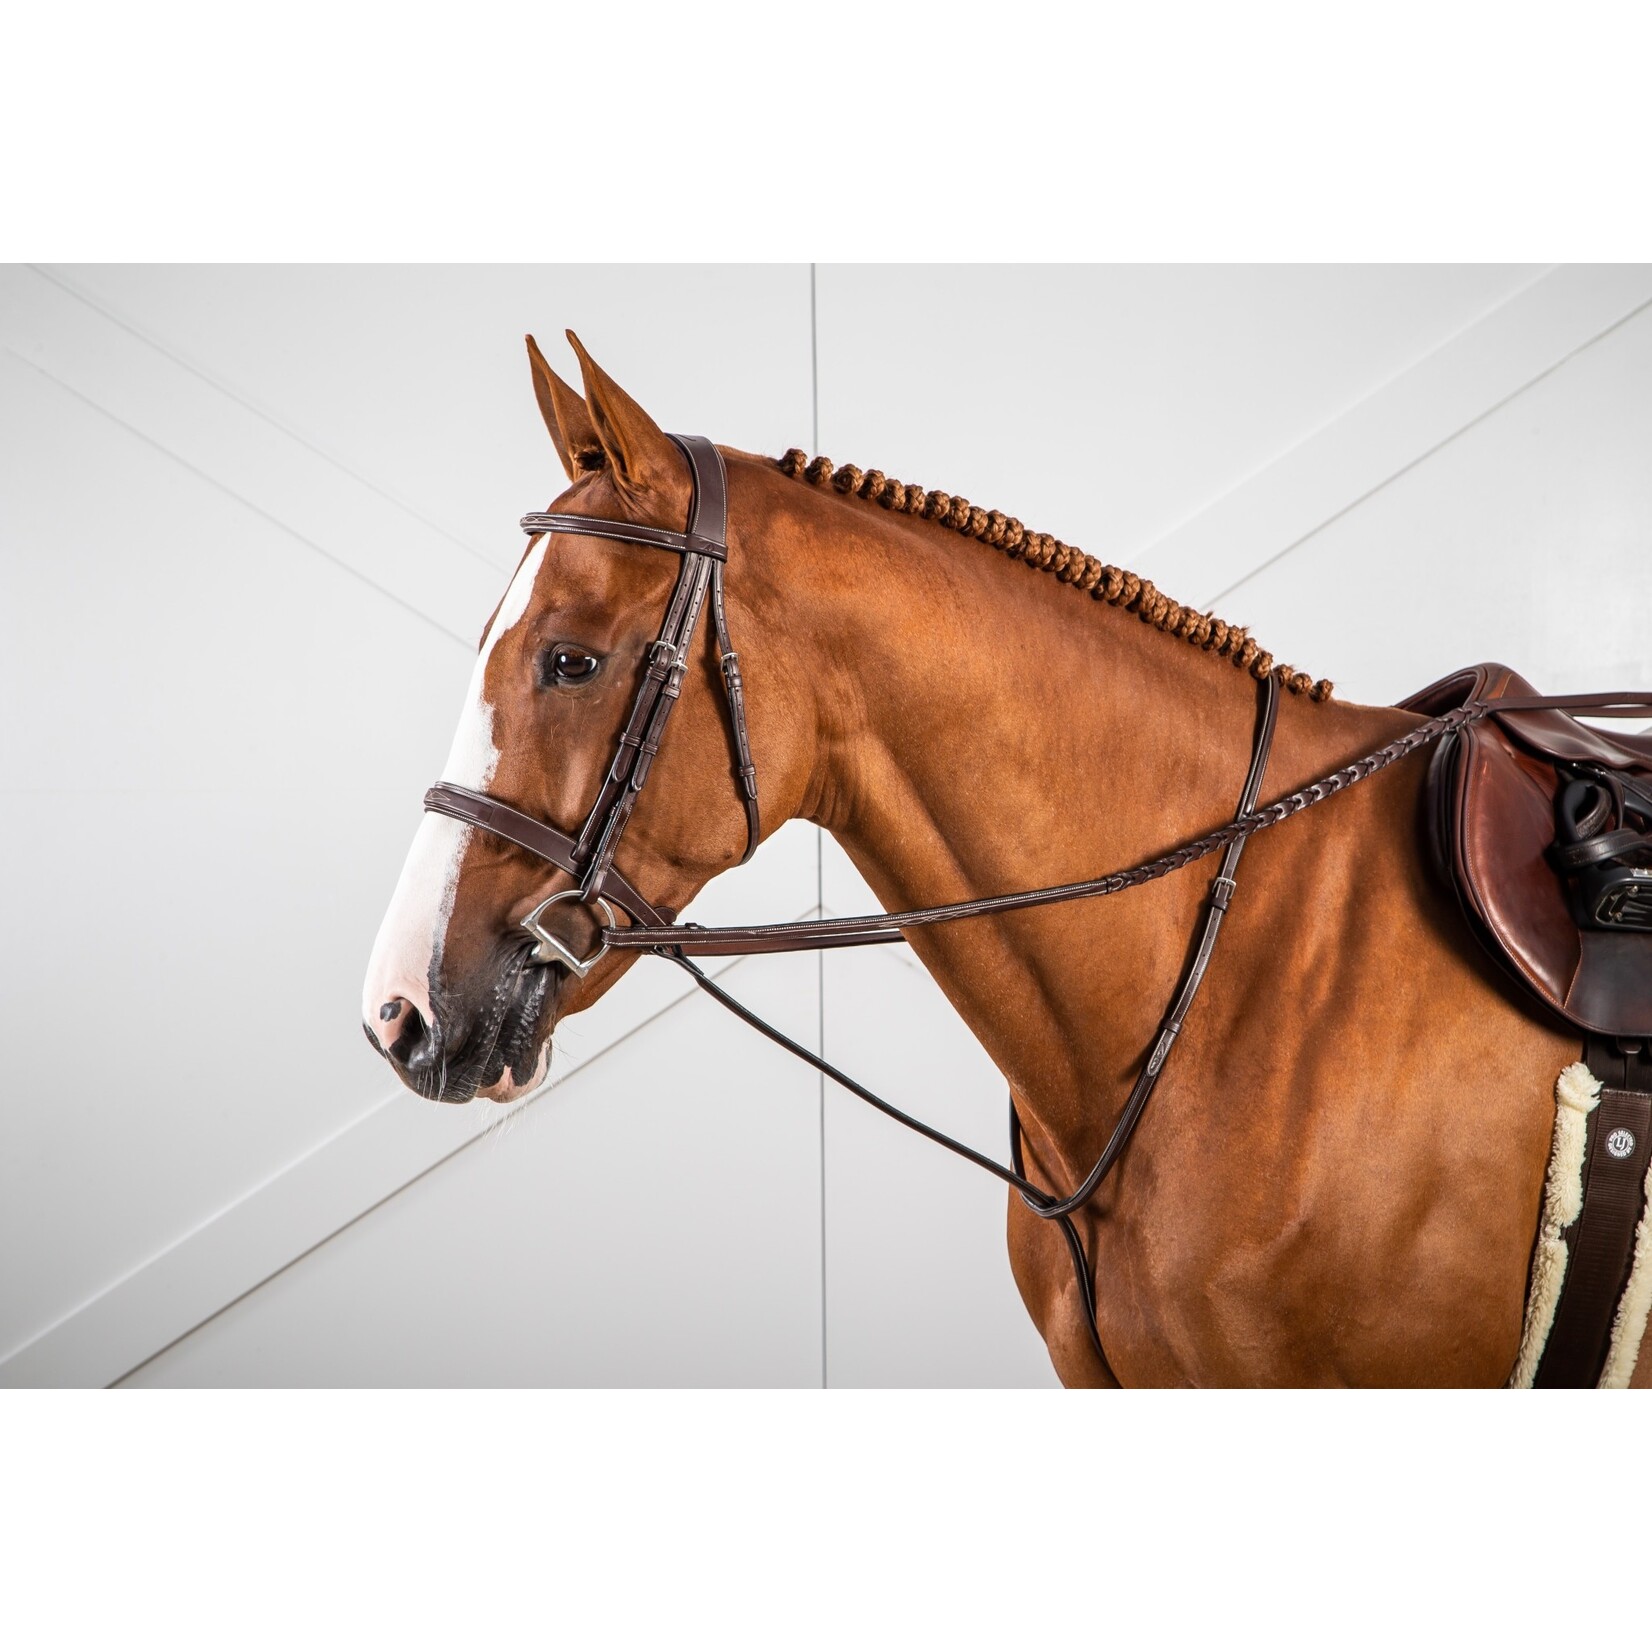 Dy'on US05R Dy’on 5/8” Hunter Laced Reins, Fancy Stitched, Cream Stitching, Nickel Hardware